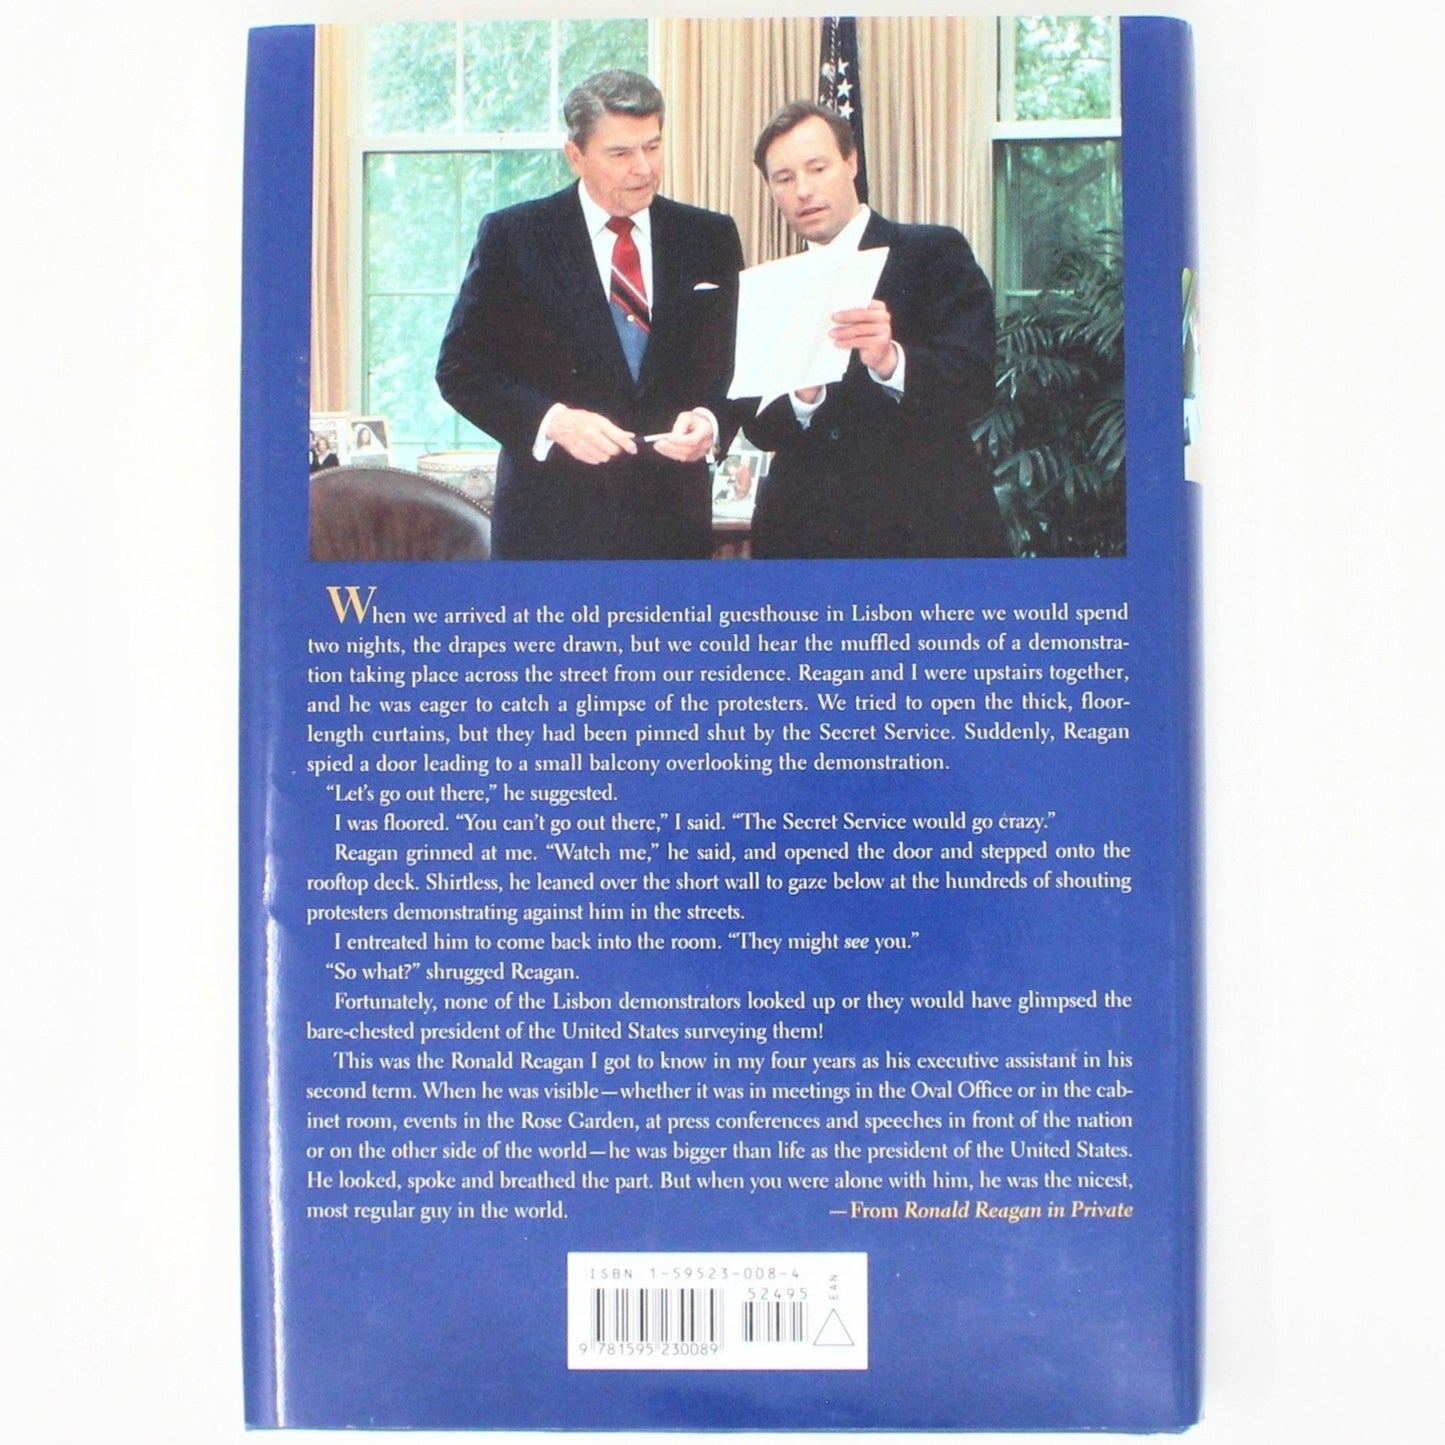 Book, Ronald Reagan In Private, Memoir of My Years in the White House, Kuhn, Hardcover, 2004